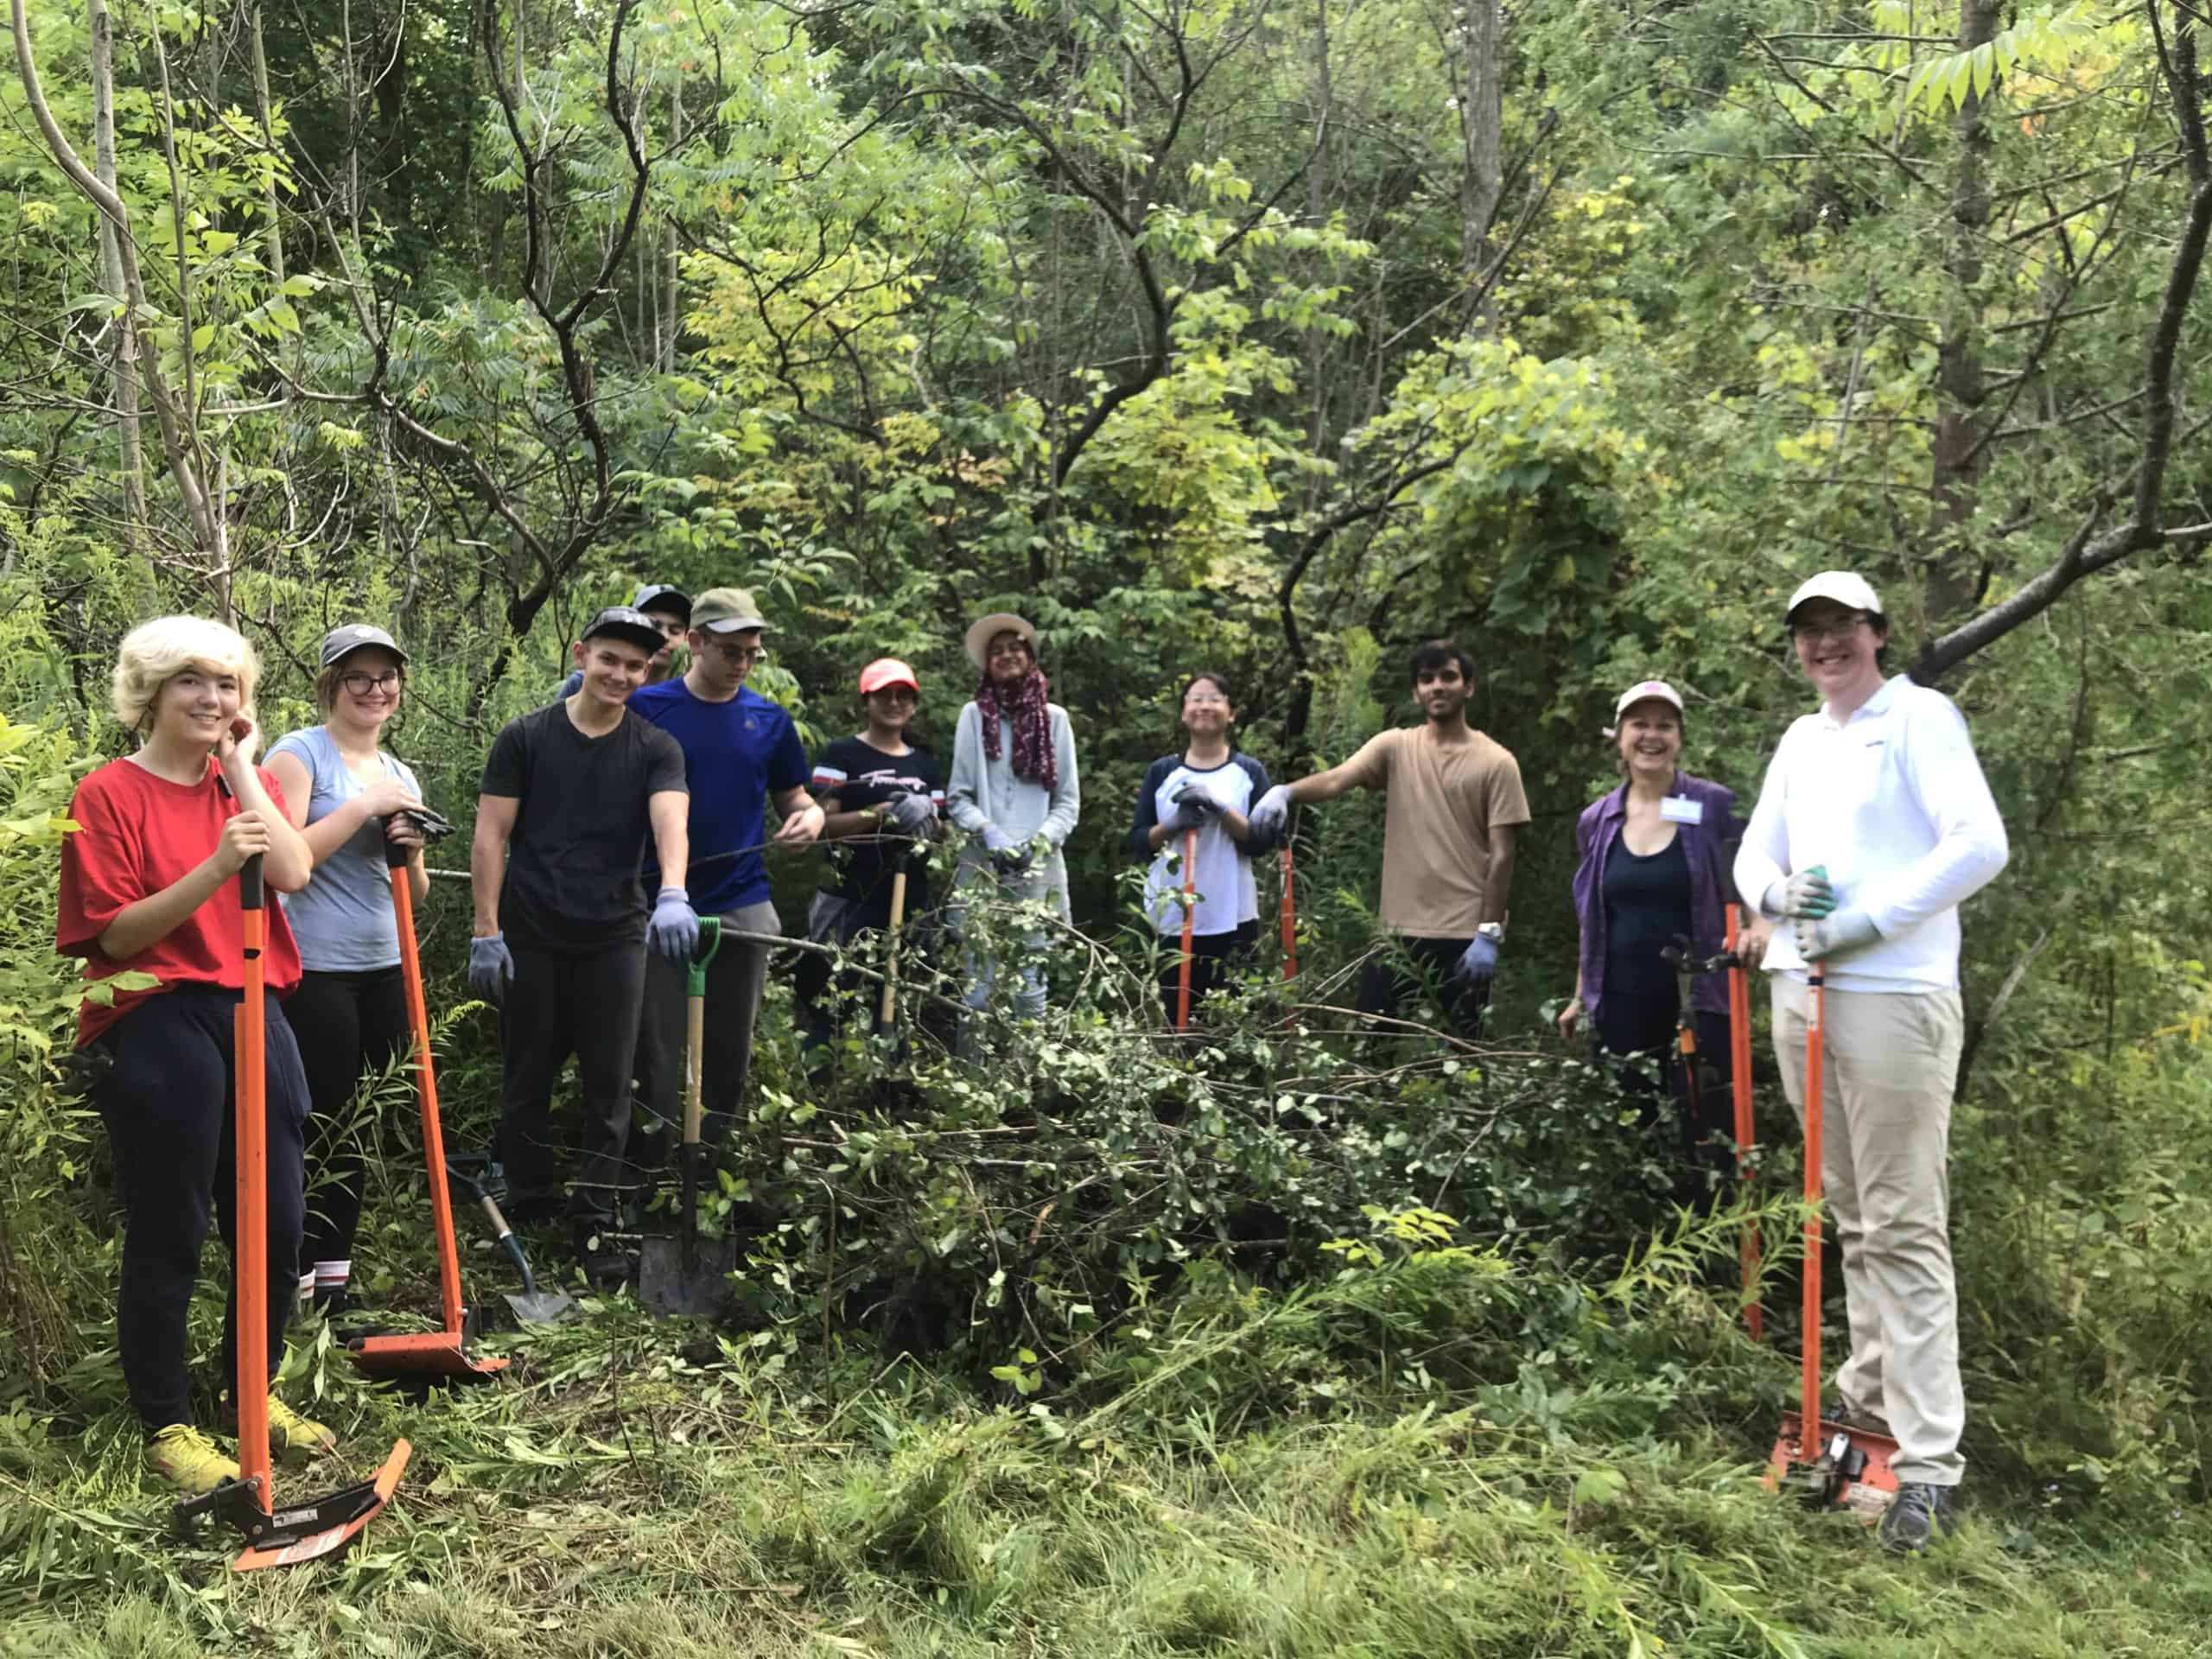 Group of people outside pulling invasive plants